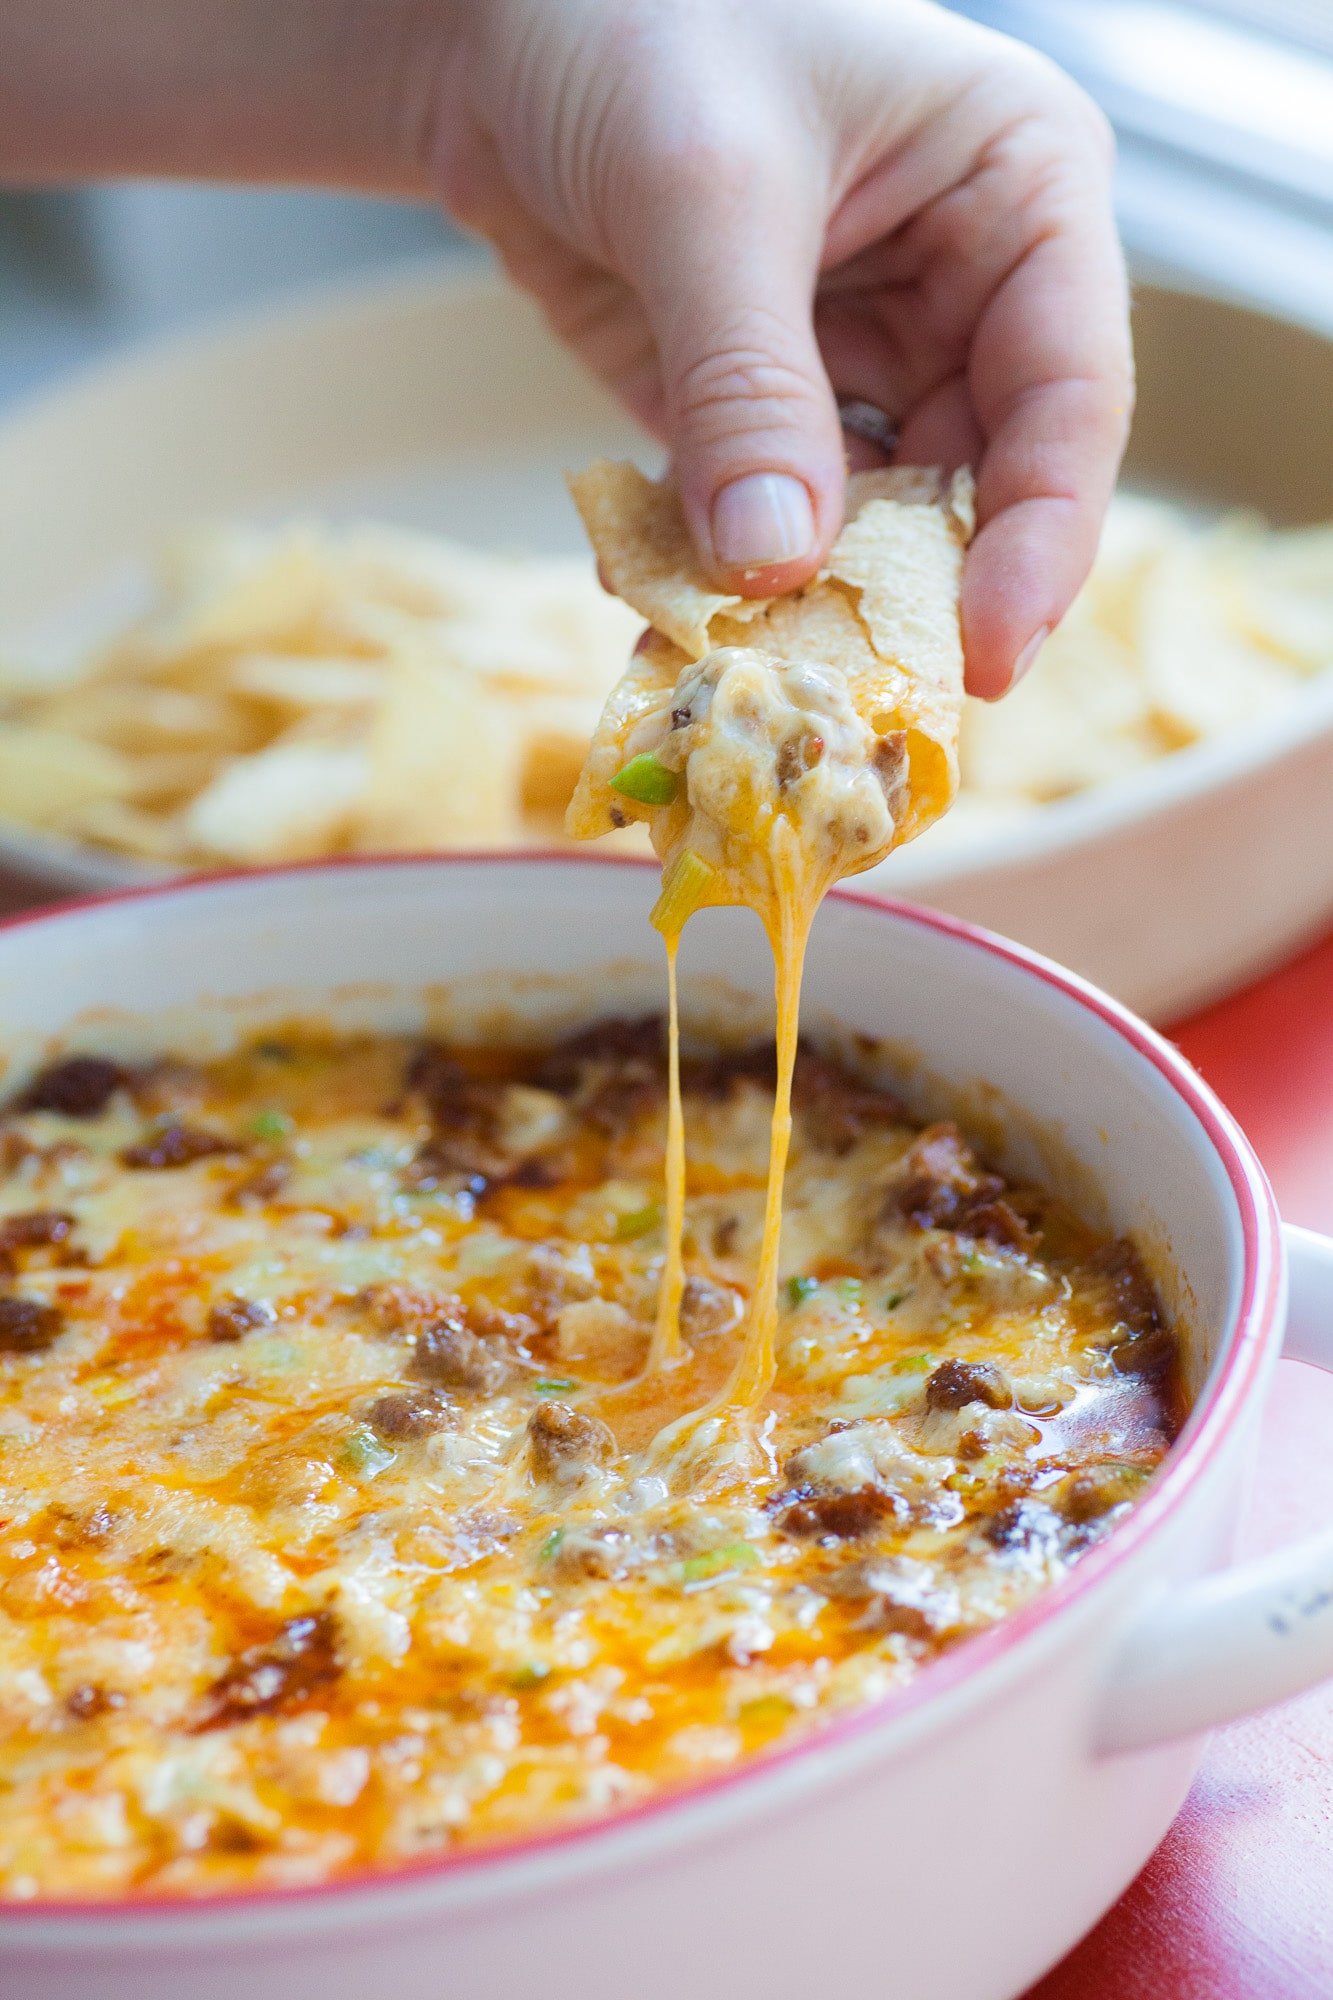 Chip of melted cheese from Queso Fundido with Chorizo.